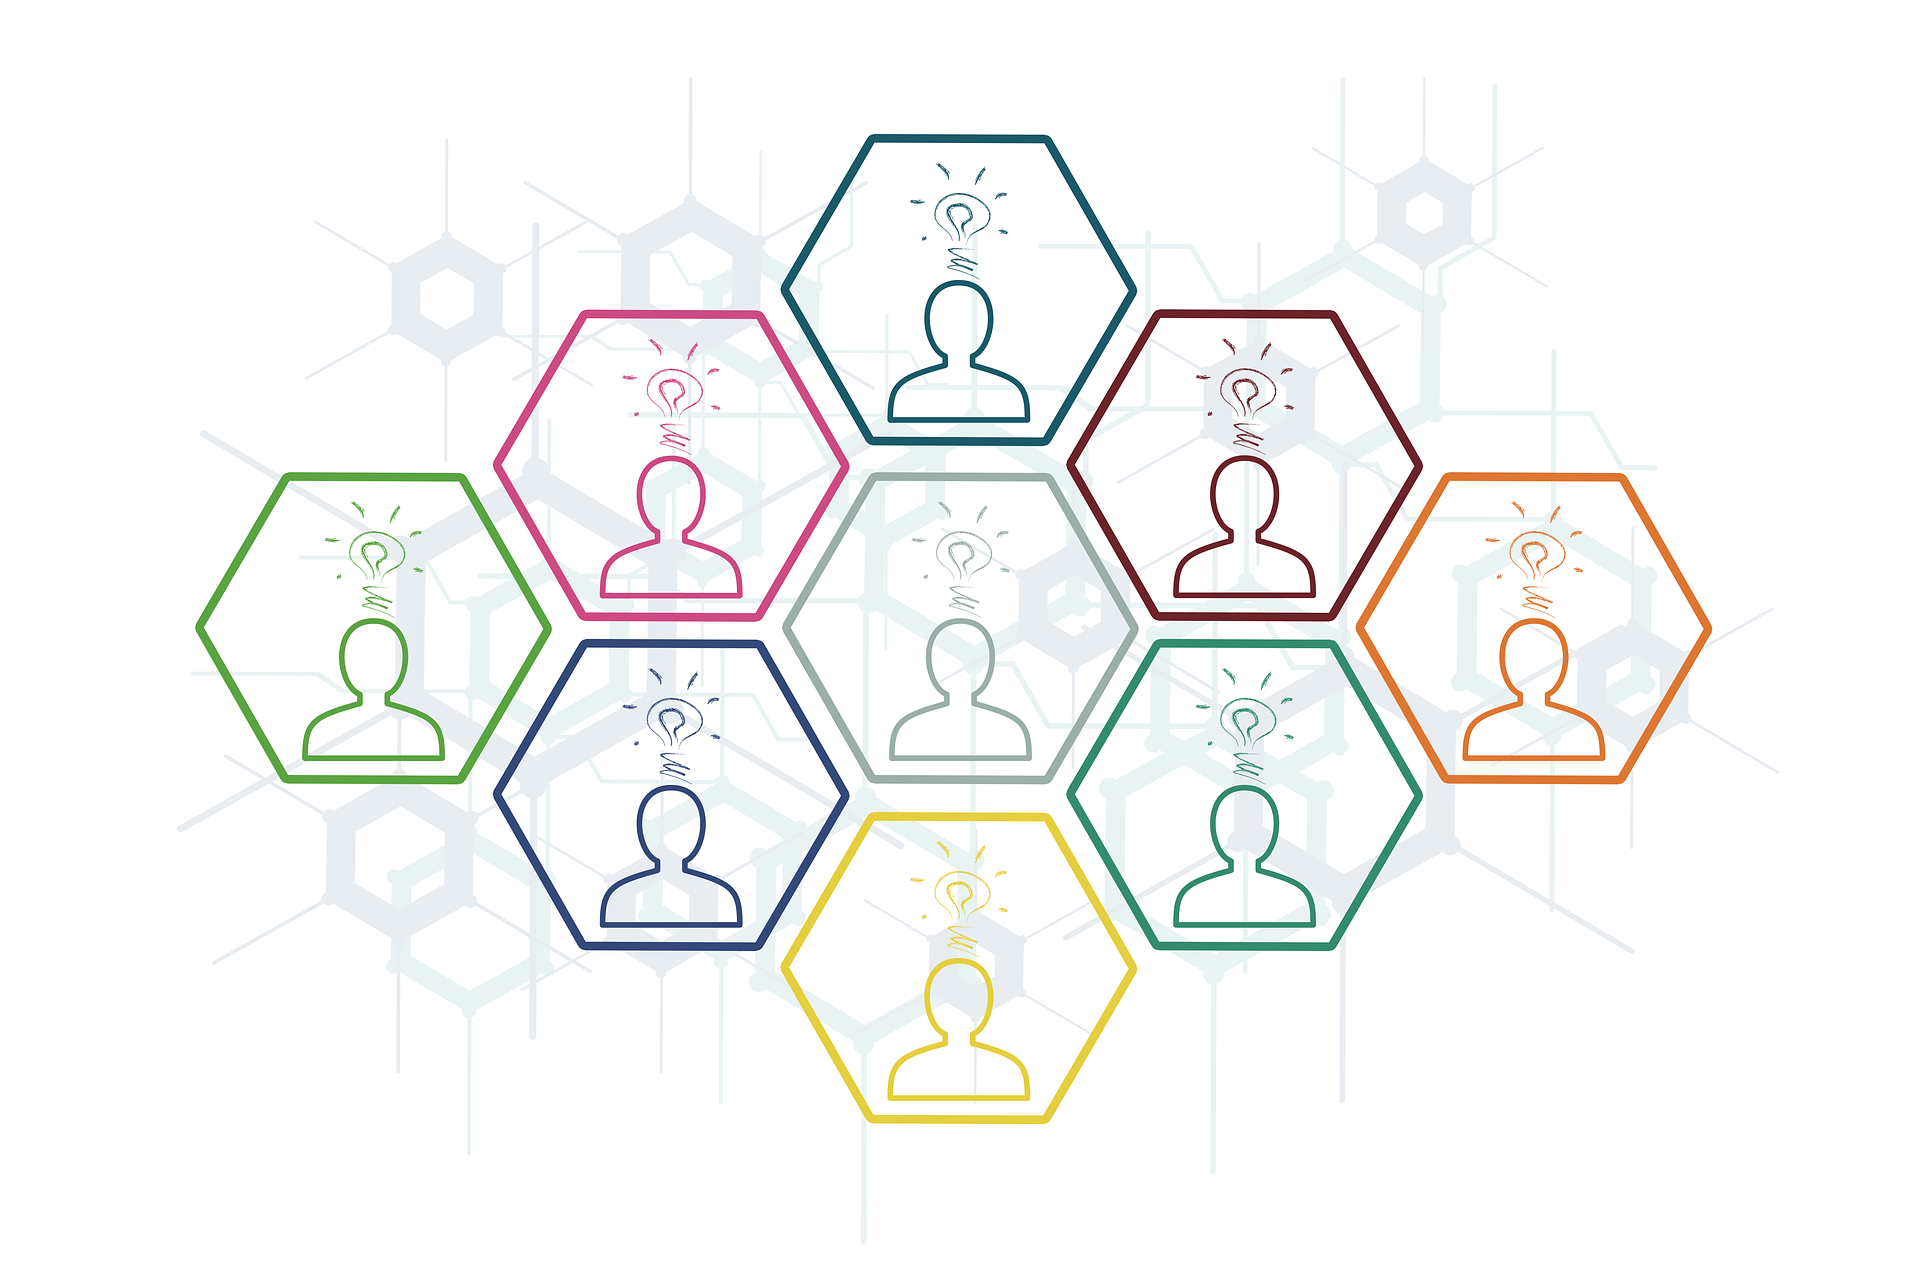 image of hexagons containing people arranged together